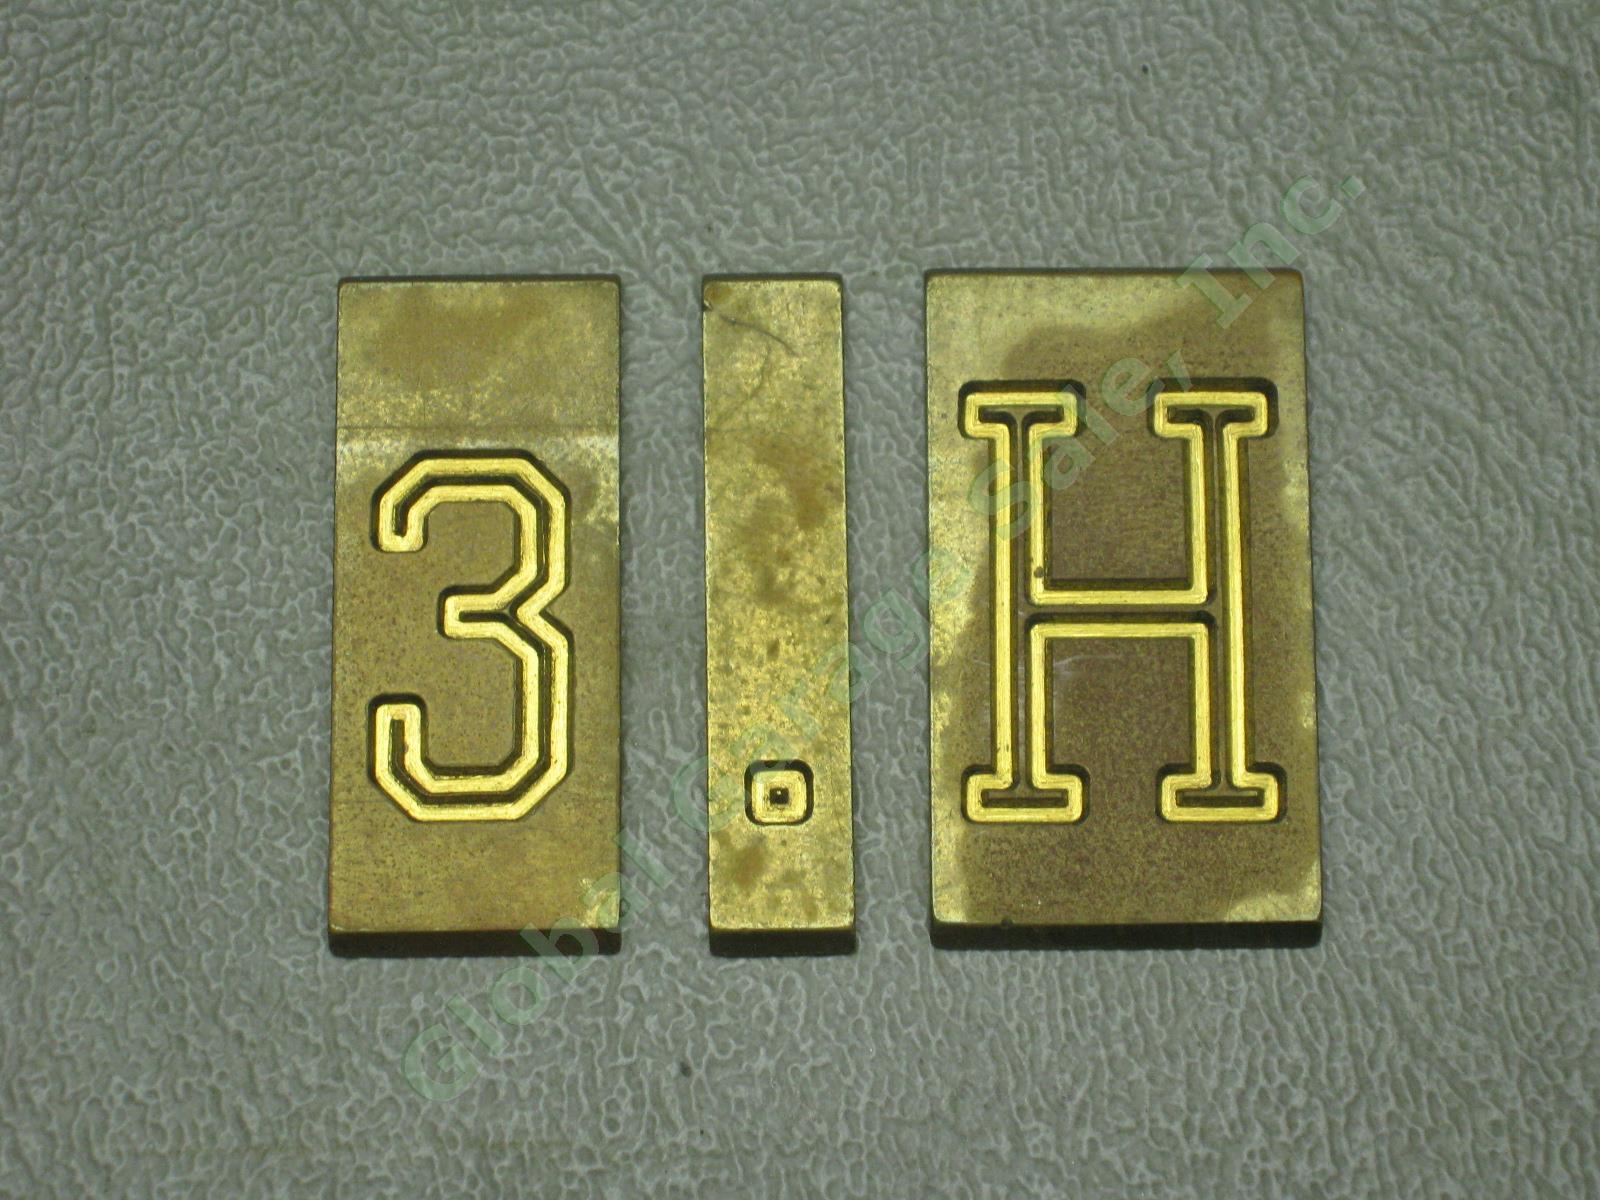 New Hermes Brass Double Line Block Type Engraving Font Letters Number Set Lot NR 1